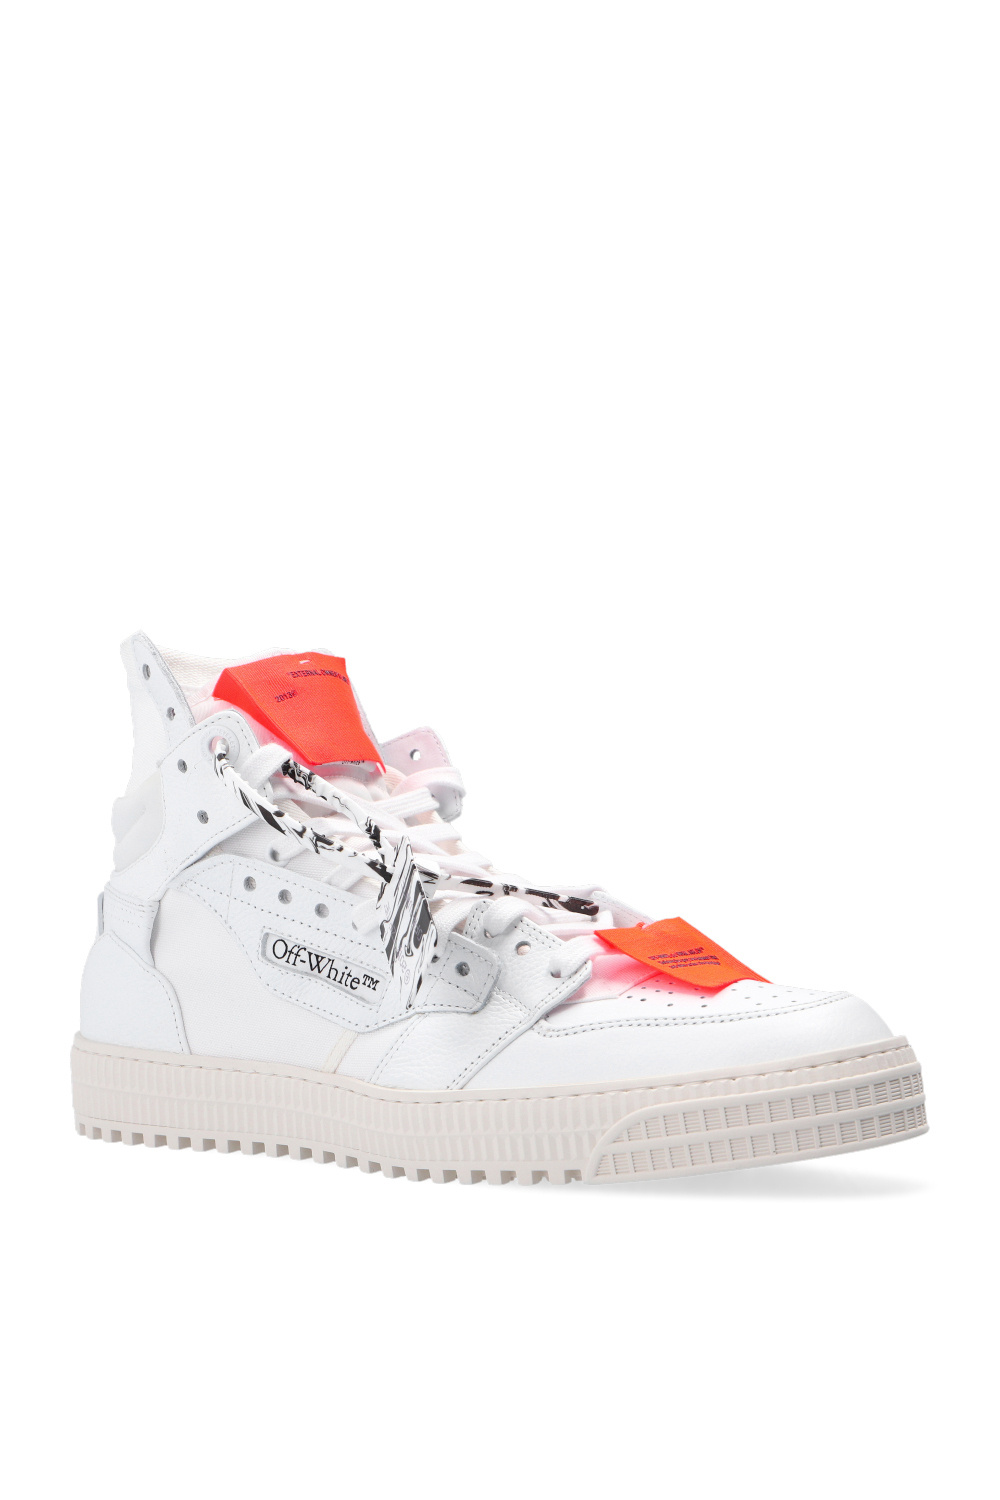 Off-White ‘3.0’ high-top sneakers | Men's Shoes | Vitkac